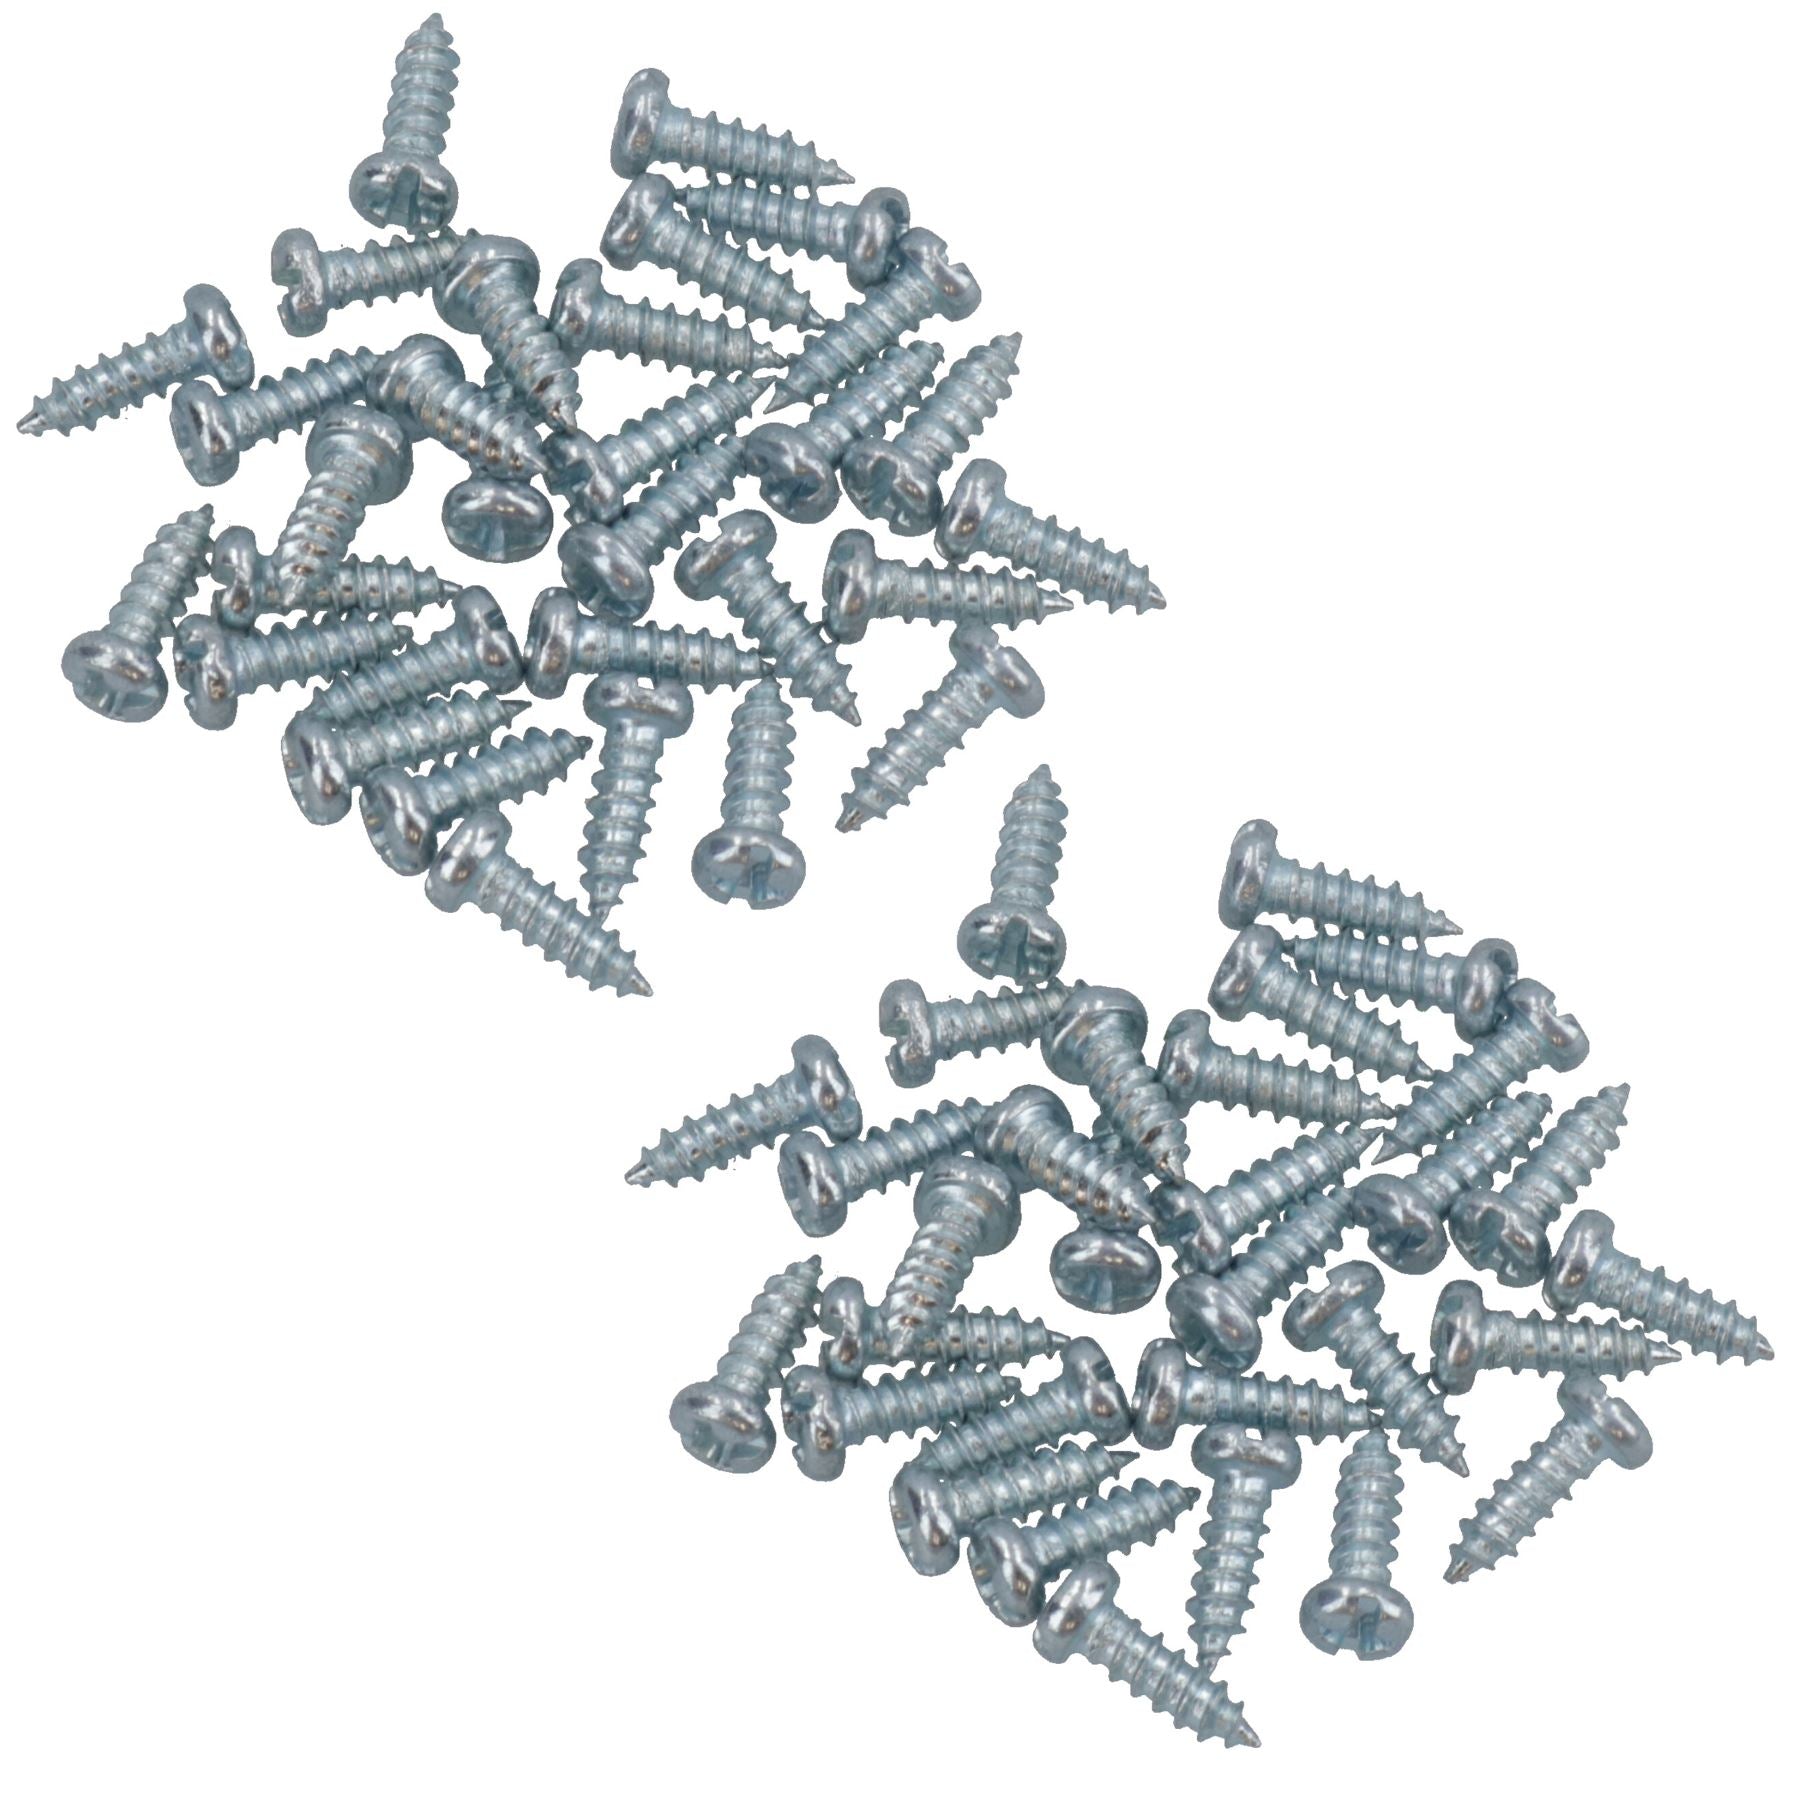 Self Tapping Screws PH2 Drive 3.5mm (width) x 12mm (length) Fasteners